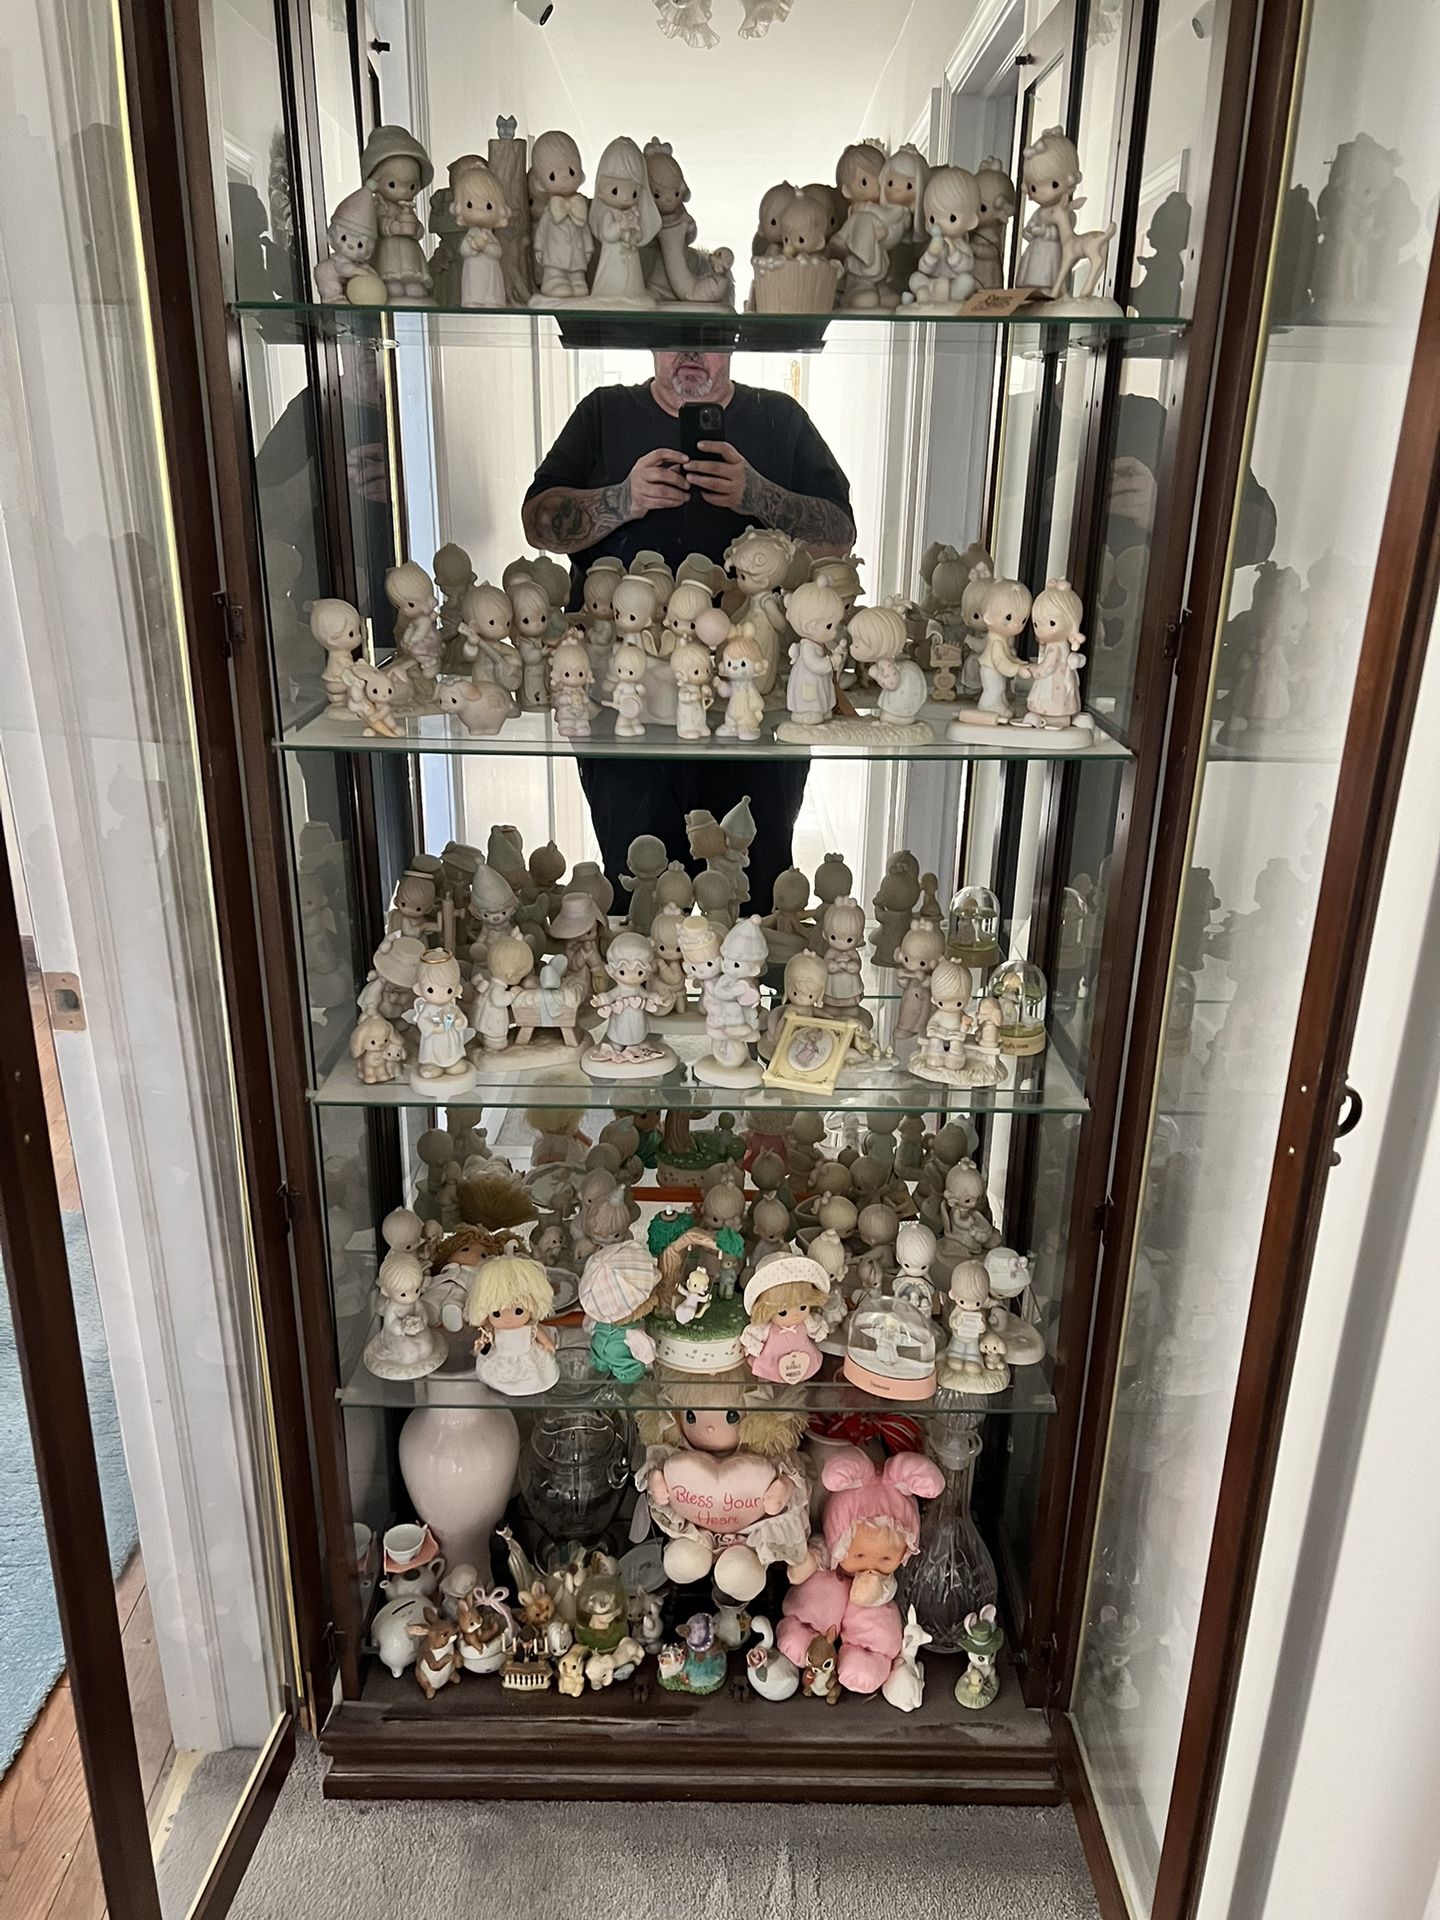 Precious Moment, Figurines, And Dolls